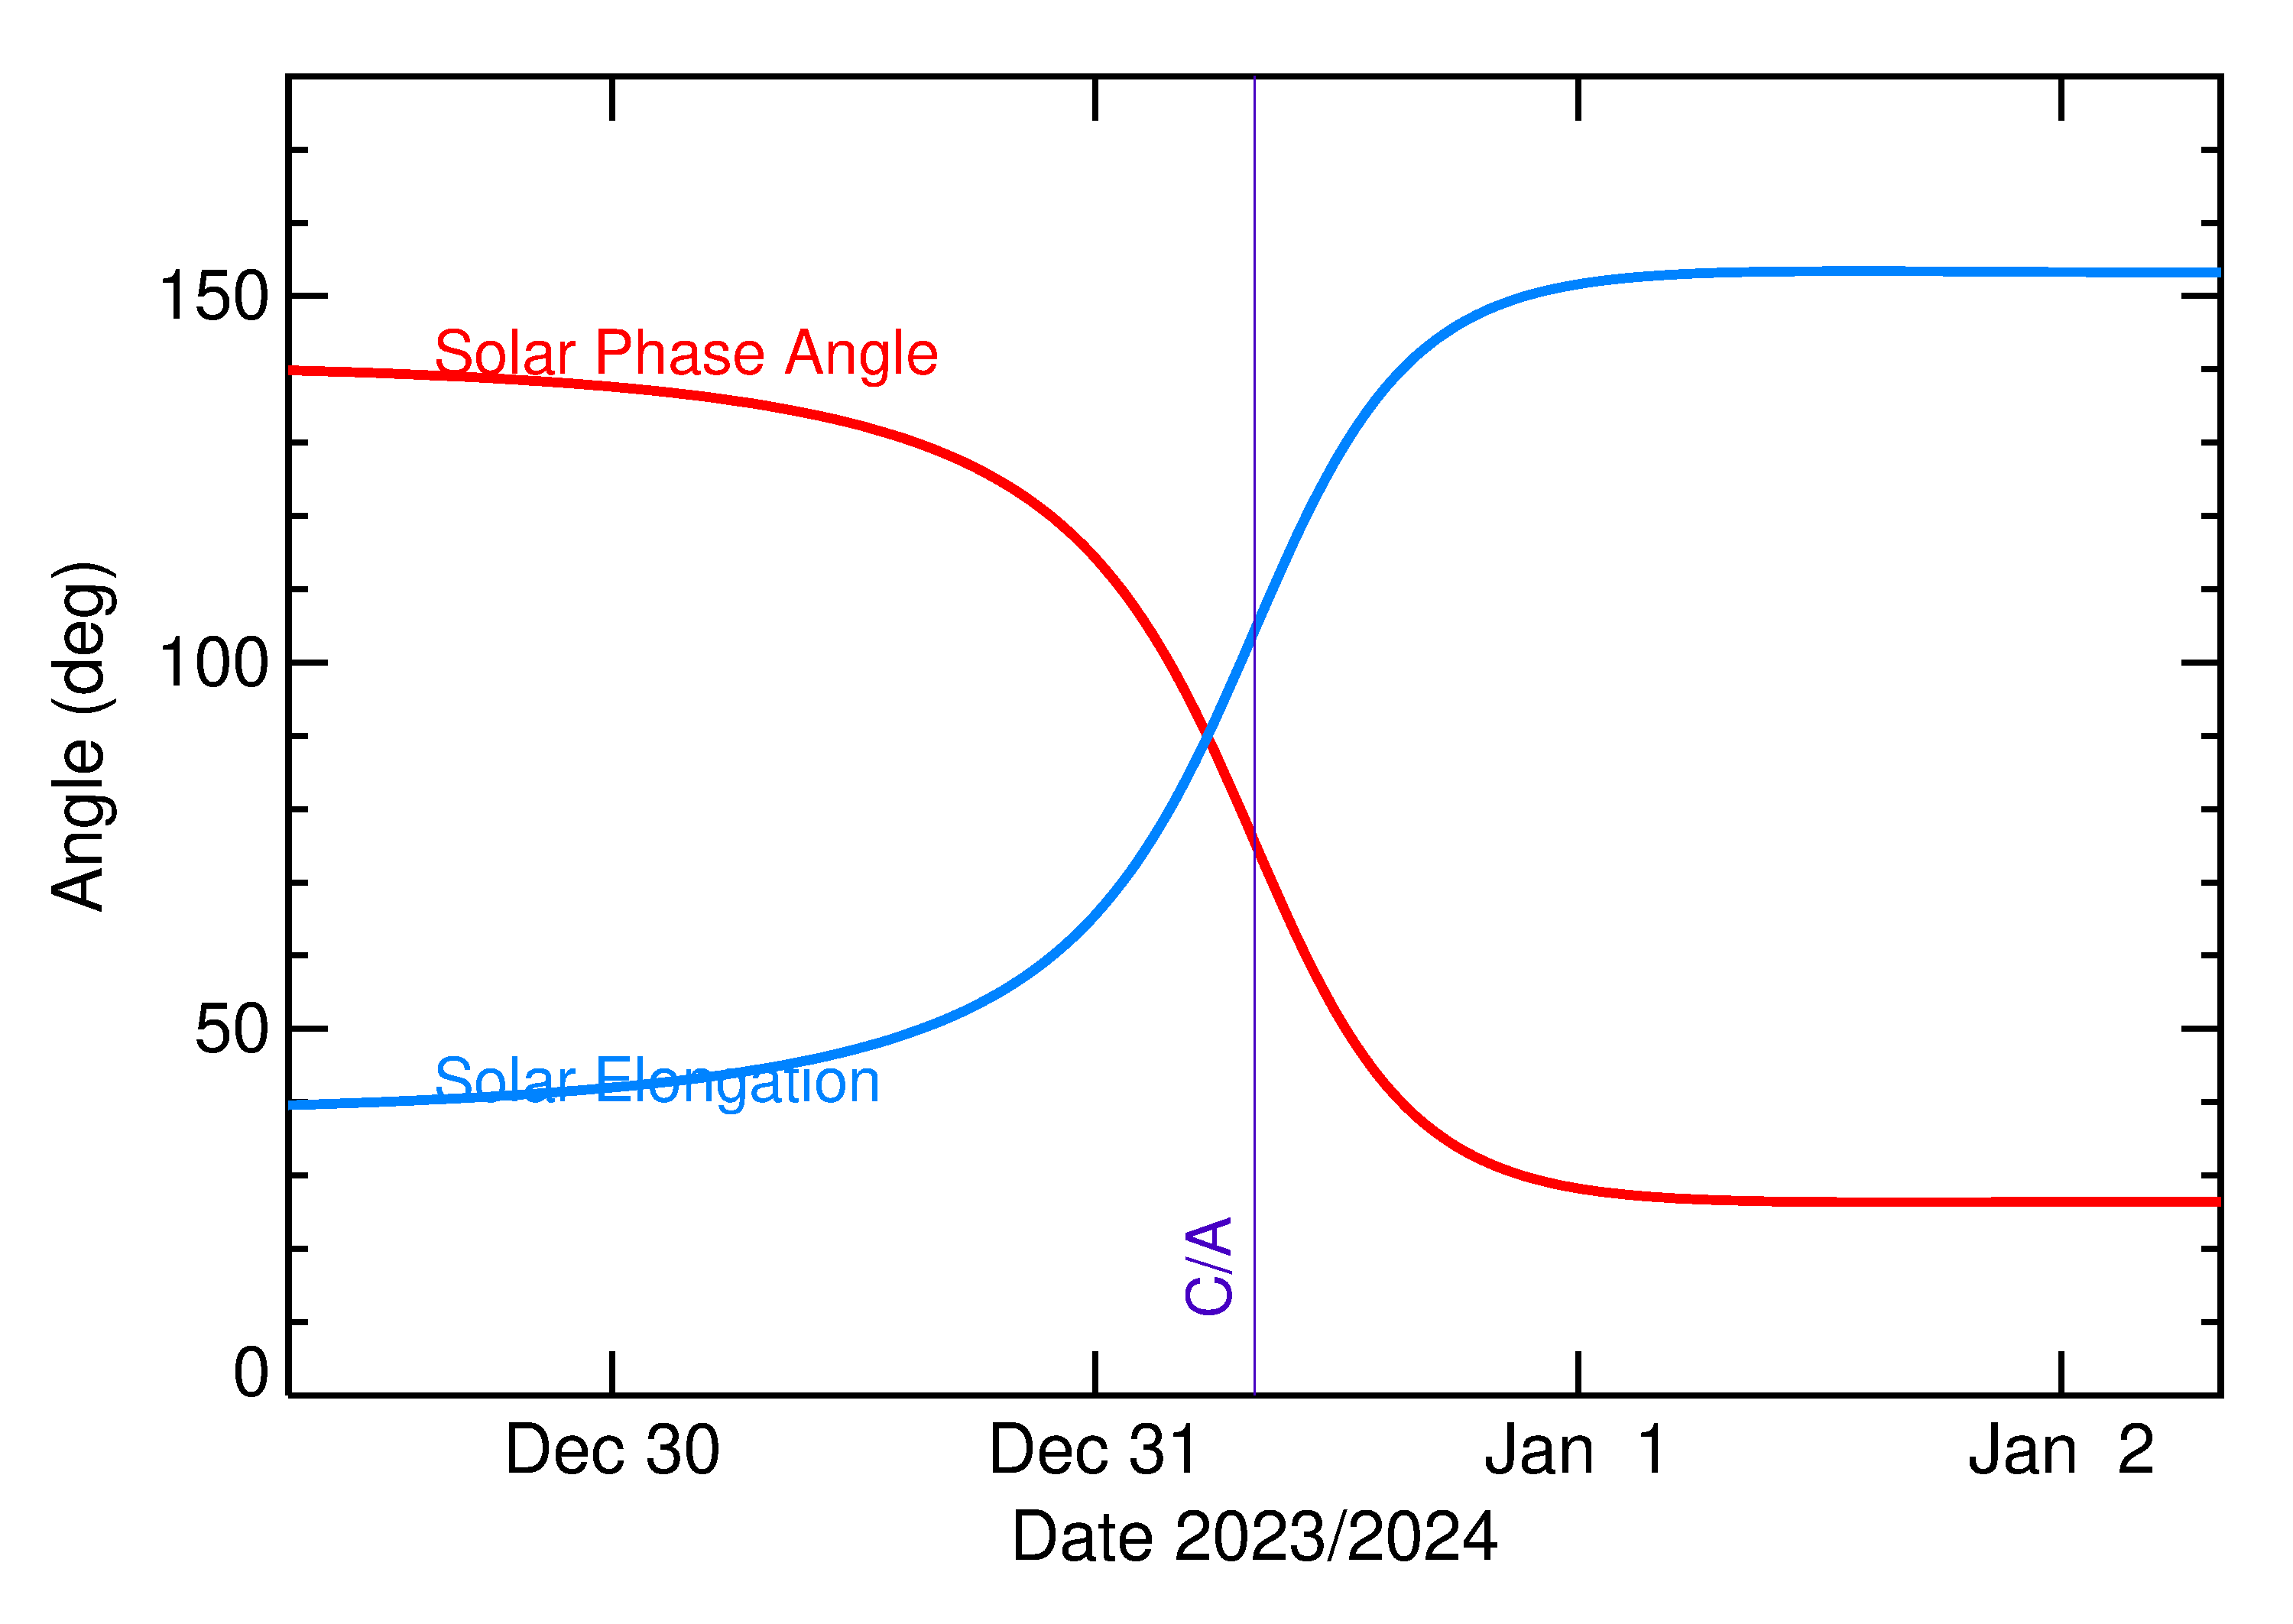 Solar Elongation and Solar Phase Angle of 2024 AL in the days around closest approach